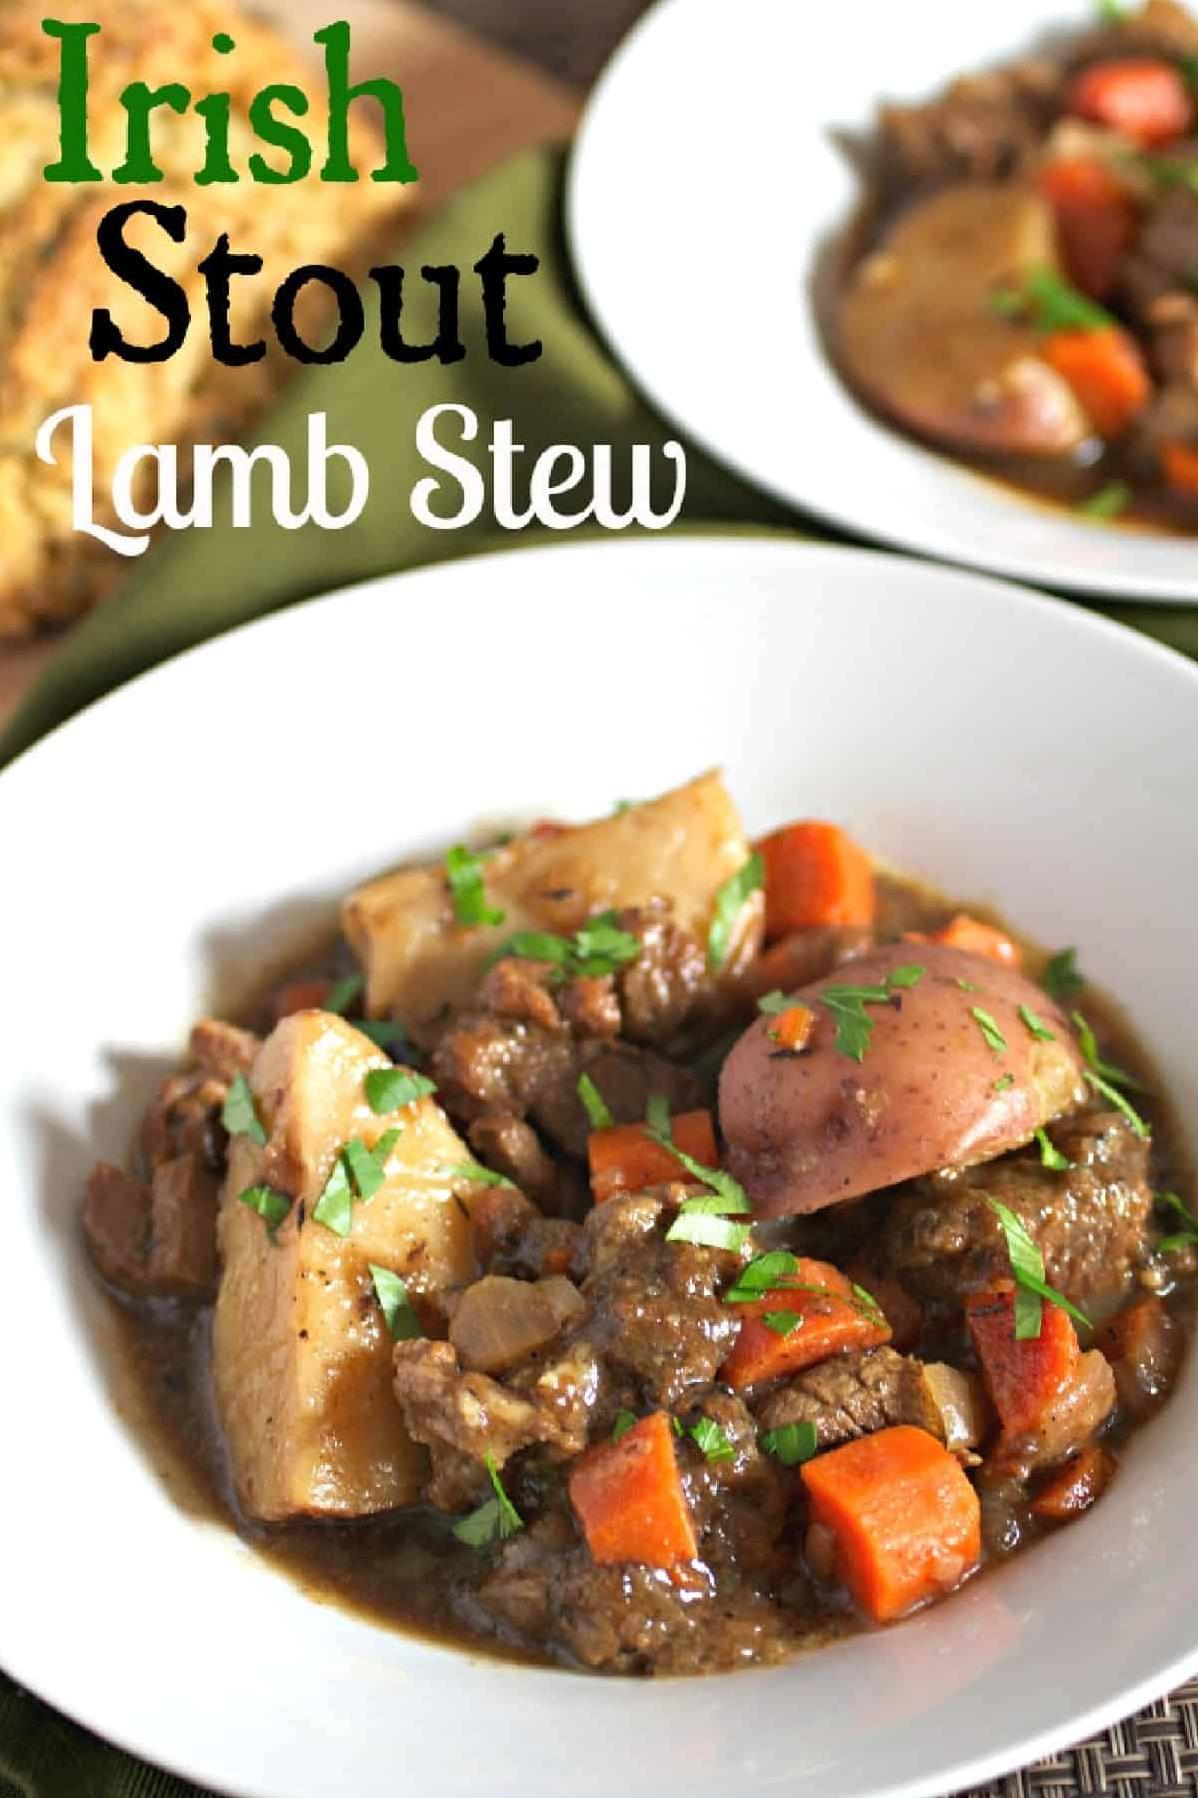  The aroma of Guinness Stout will fill your home as this stew simmers.